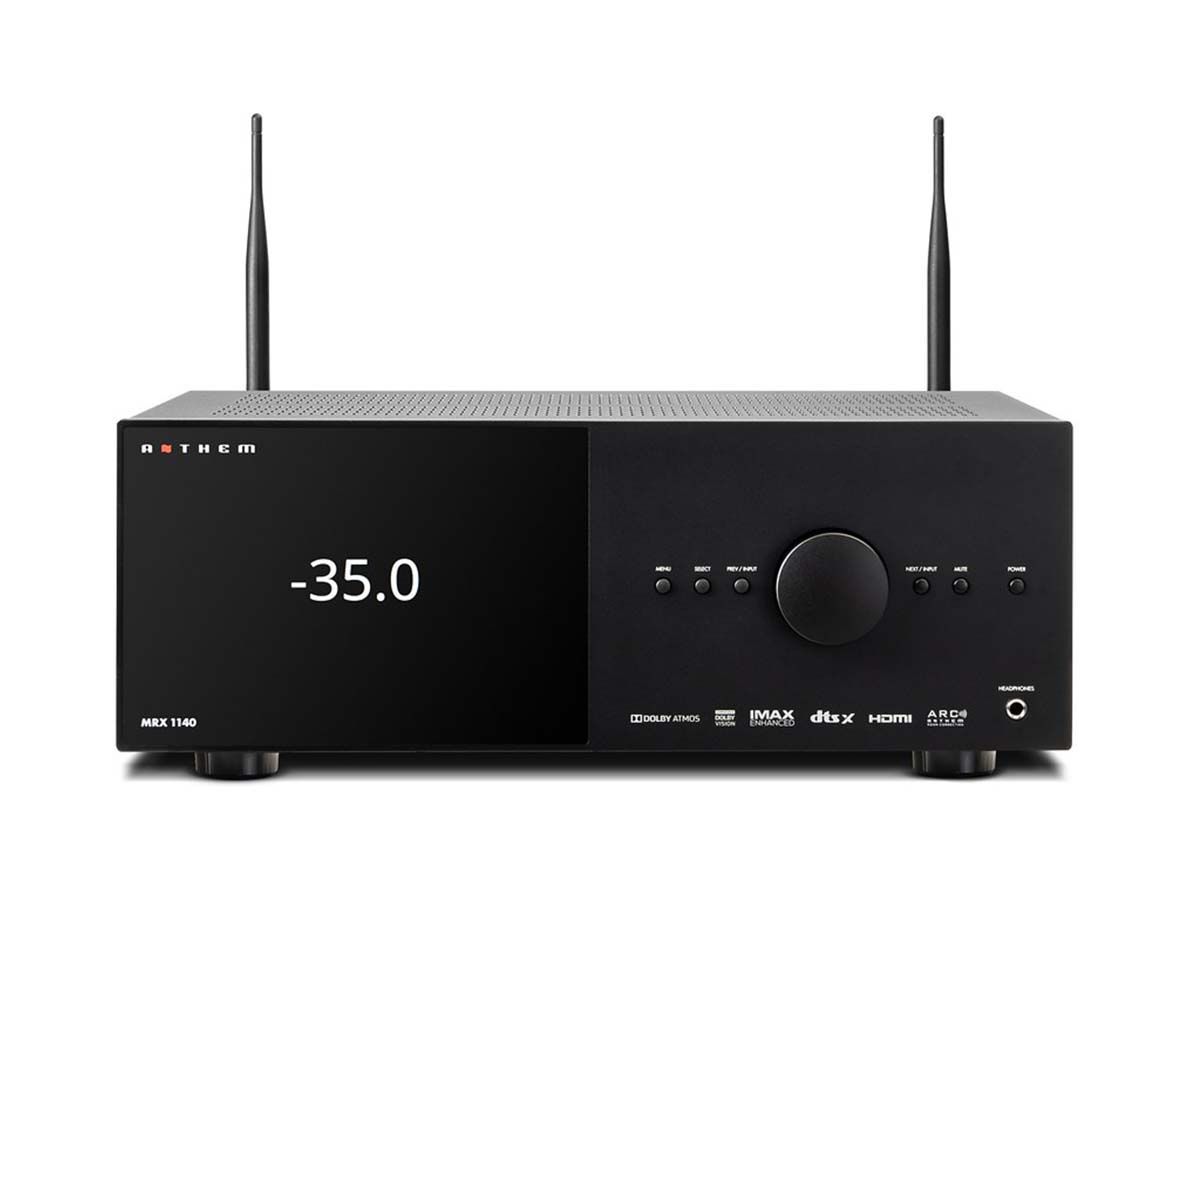 Anthem MRX 1140 Receiver, front view with antennae